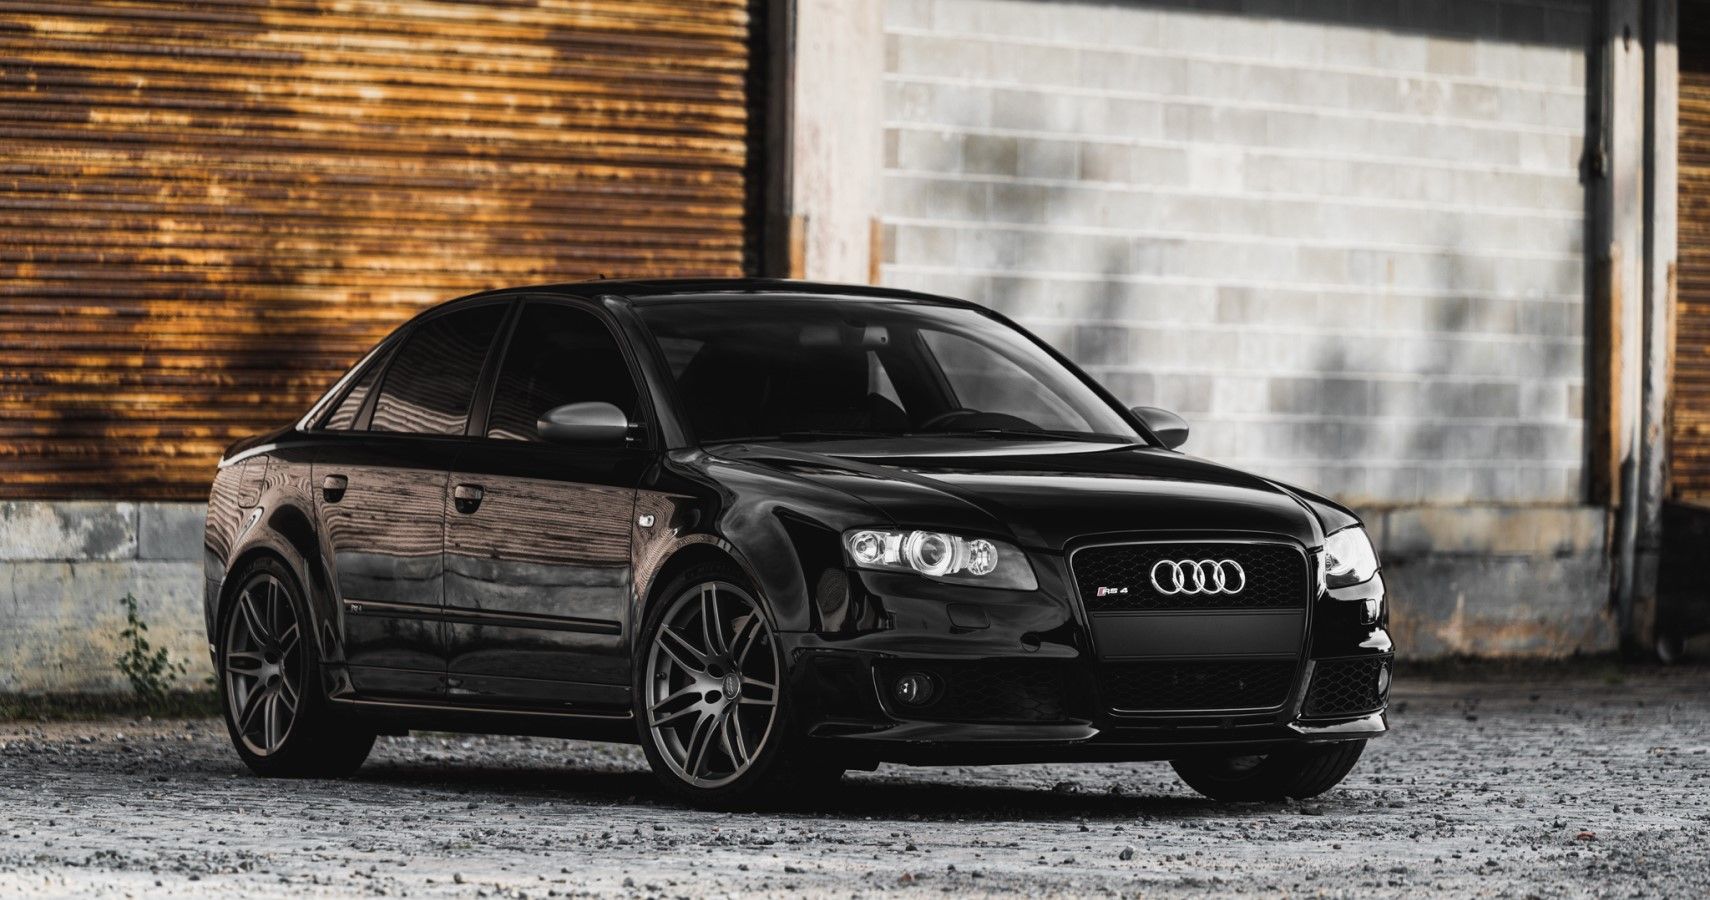 2008 Audi RS4 in black front third quarter view